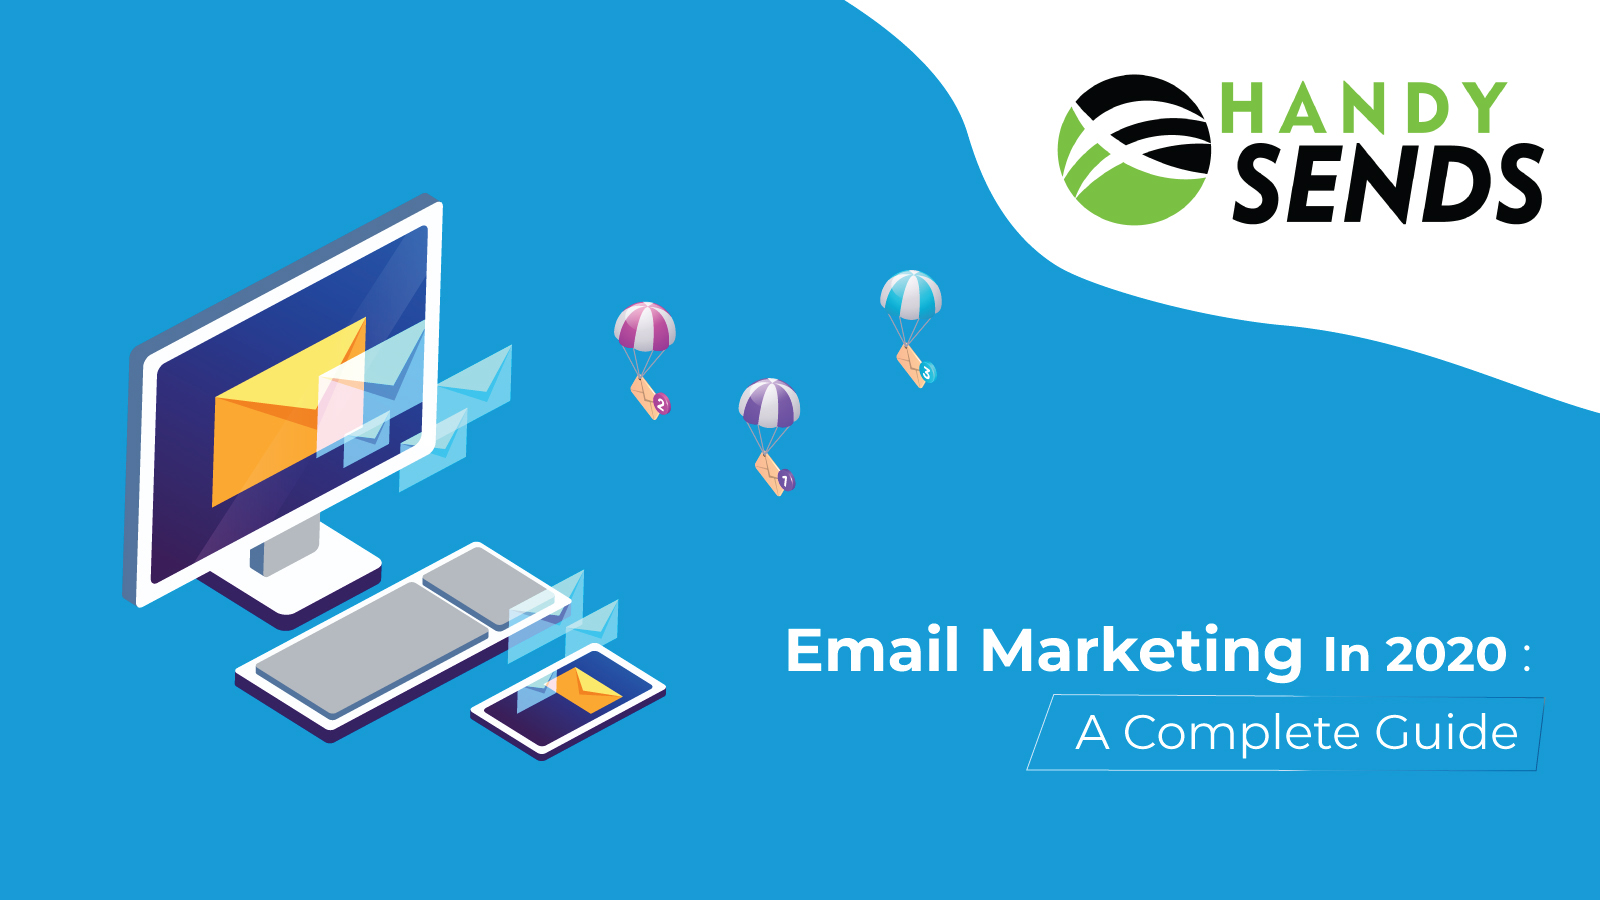 Email Marketing In 2020: A Complete Guide